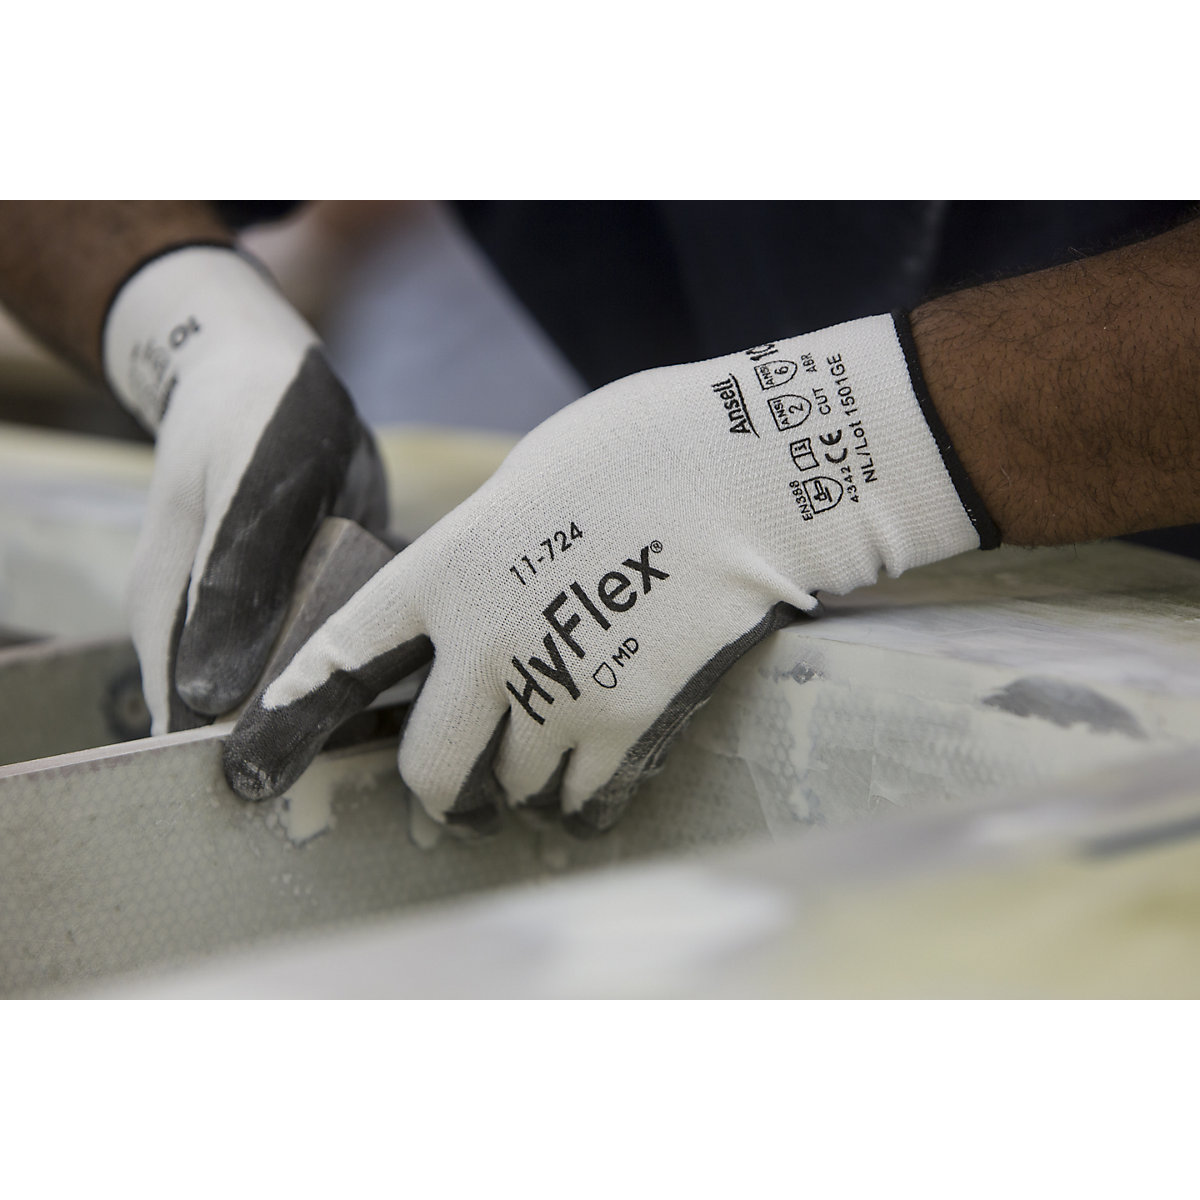 HyFlex® 11-724 work gloves – Ansell (Product illustration 3)-2